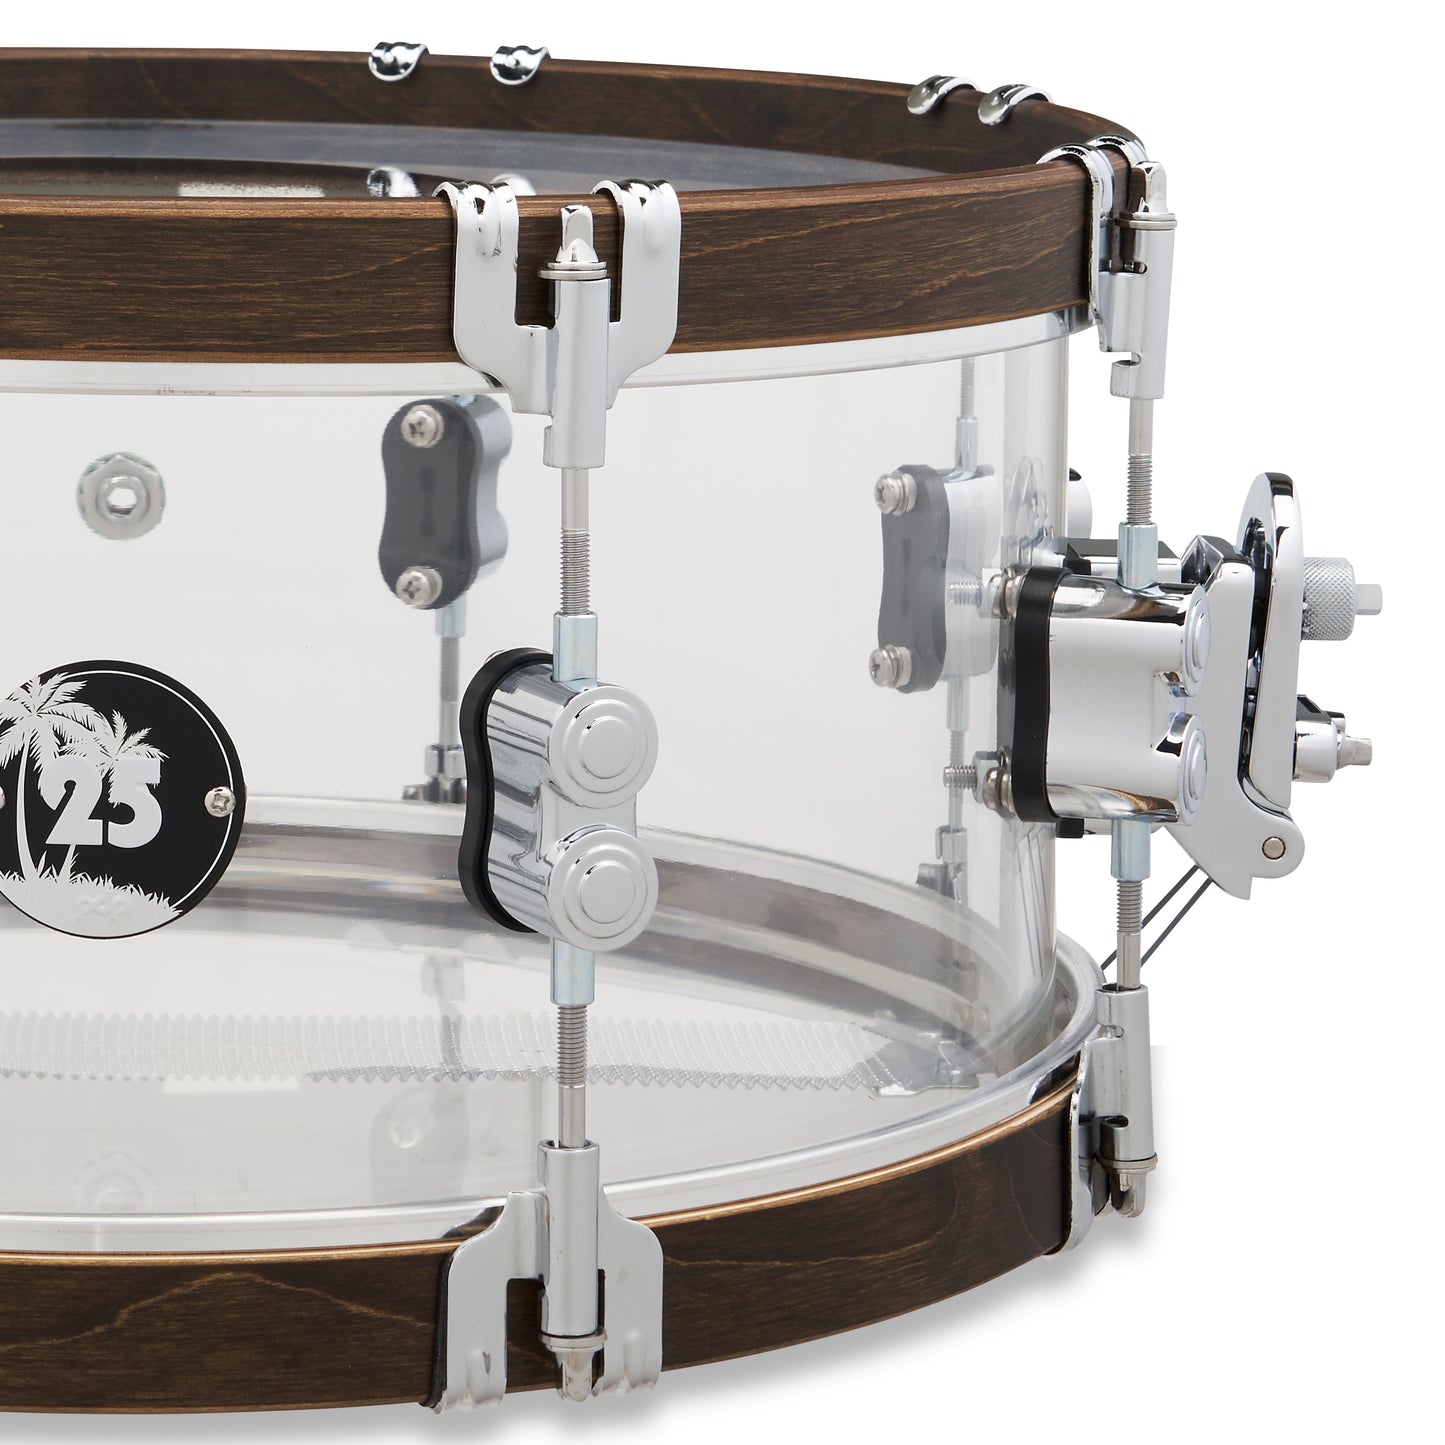 Pacific Drums & Percussion Limited Edition 25th Anniversary 6.5x14 Snare Drum